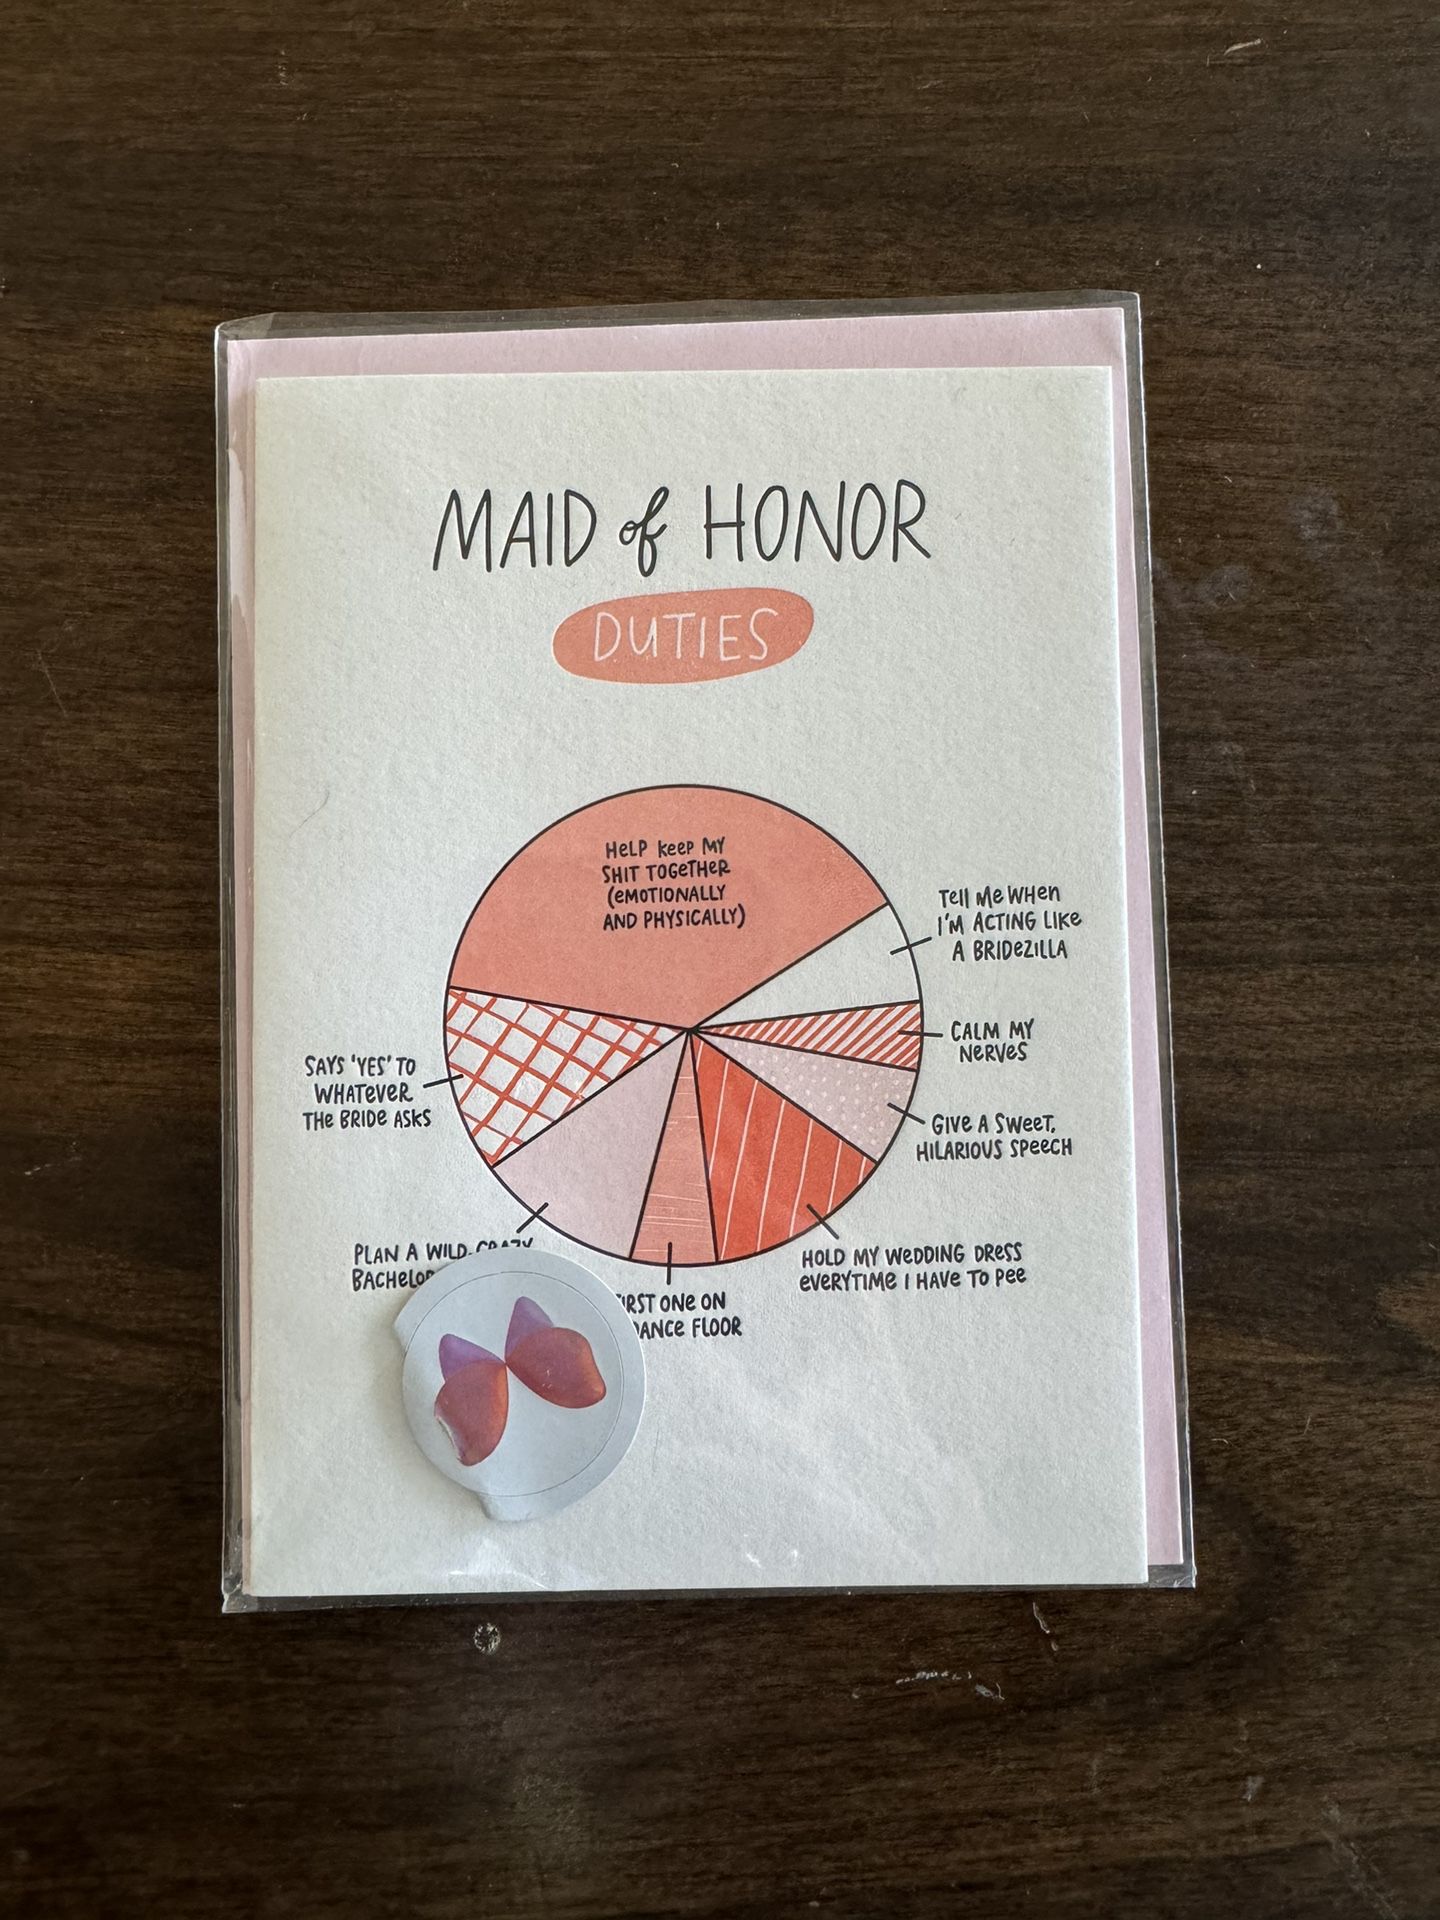 WEDDING CARDS For maid Of Honor $8For Both 